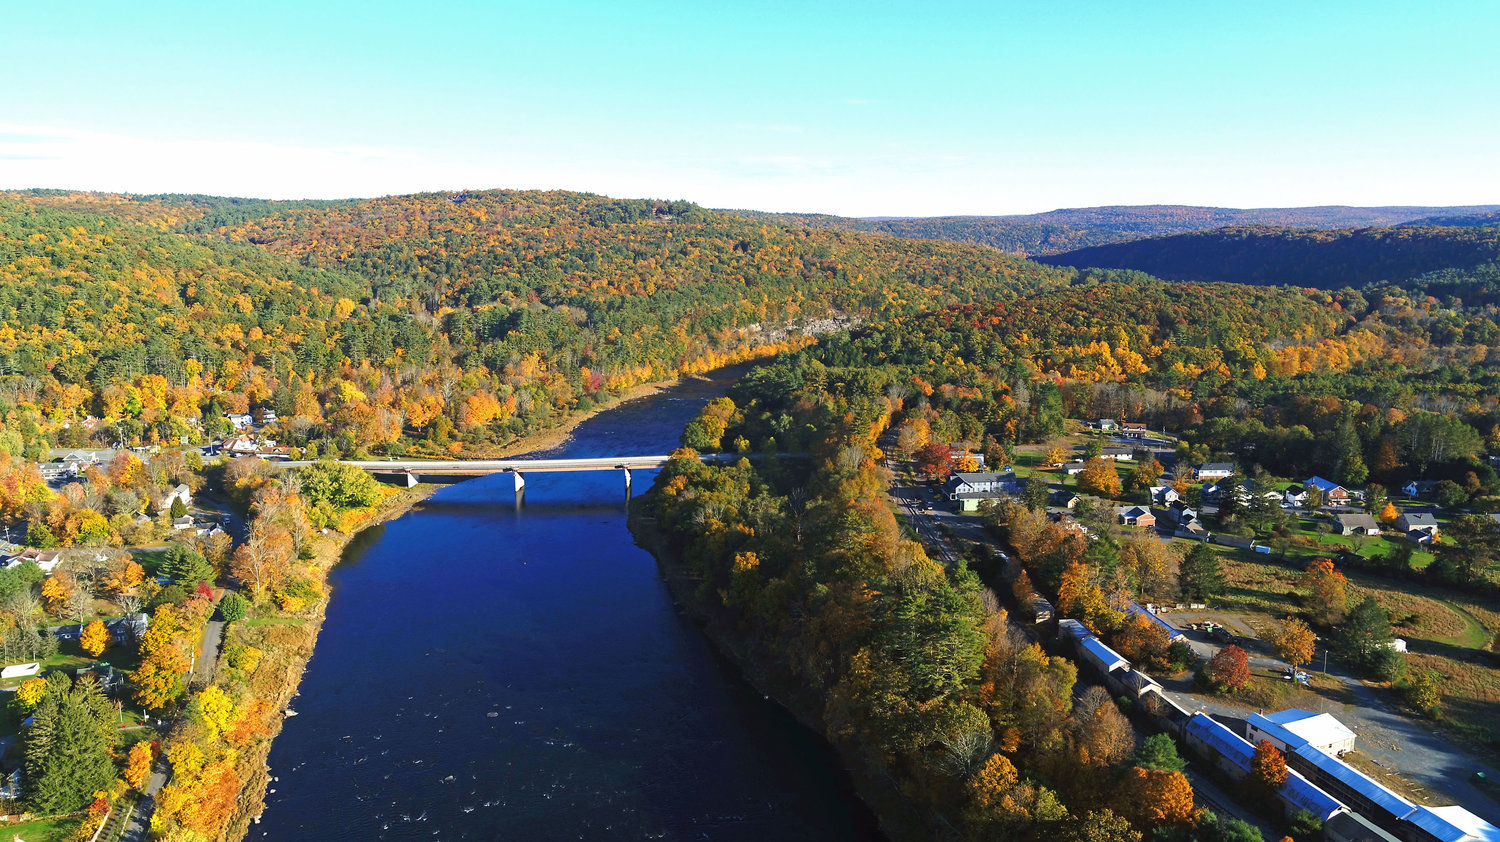 This is a view of the Shohola-Barryville bridge, looking downstream in the late afternoon in mid-October. The Shohola, PA side is on the right side of the Delaware River. In this area, there is a variety of trees among the river, including maple, oak, sycamore and locust. Any of the dark green trees are conifers, mostly white pine with some Eastern hemlock.